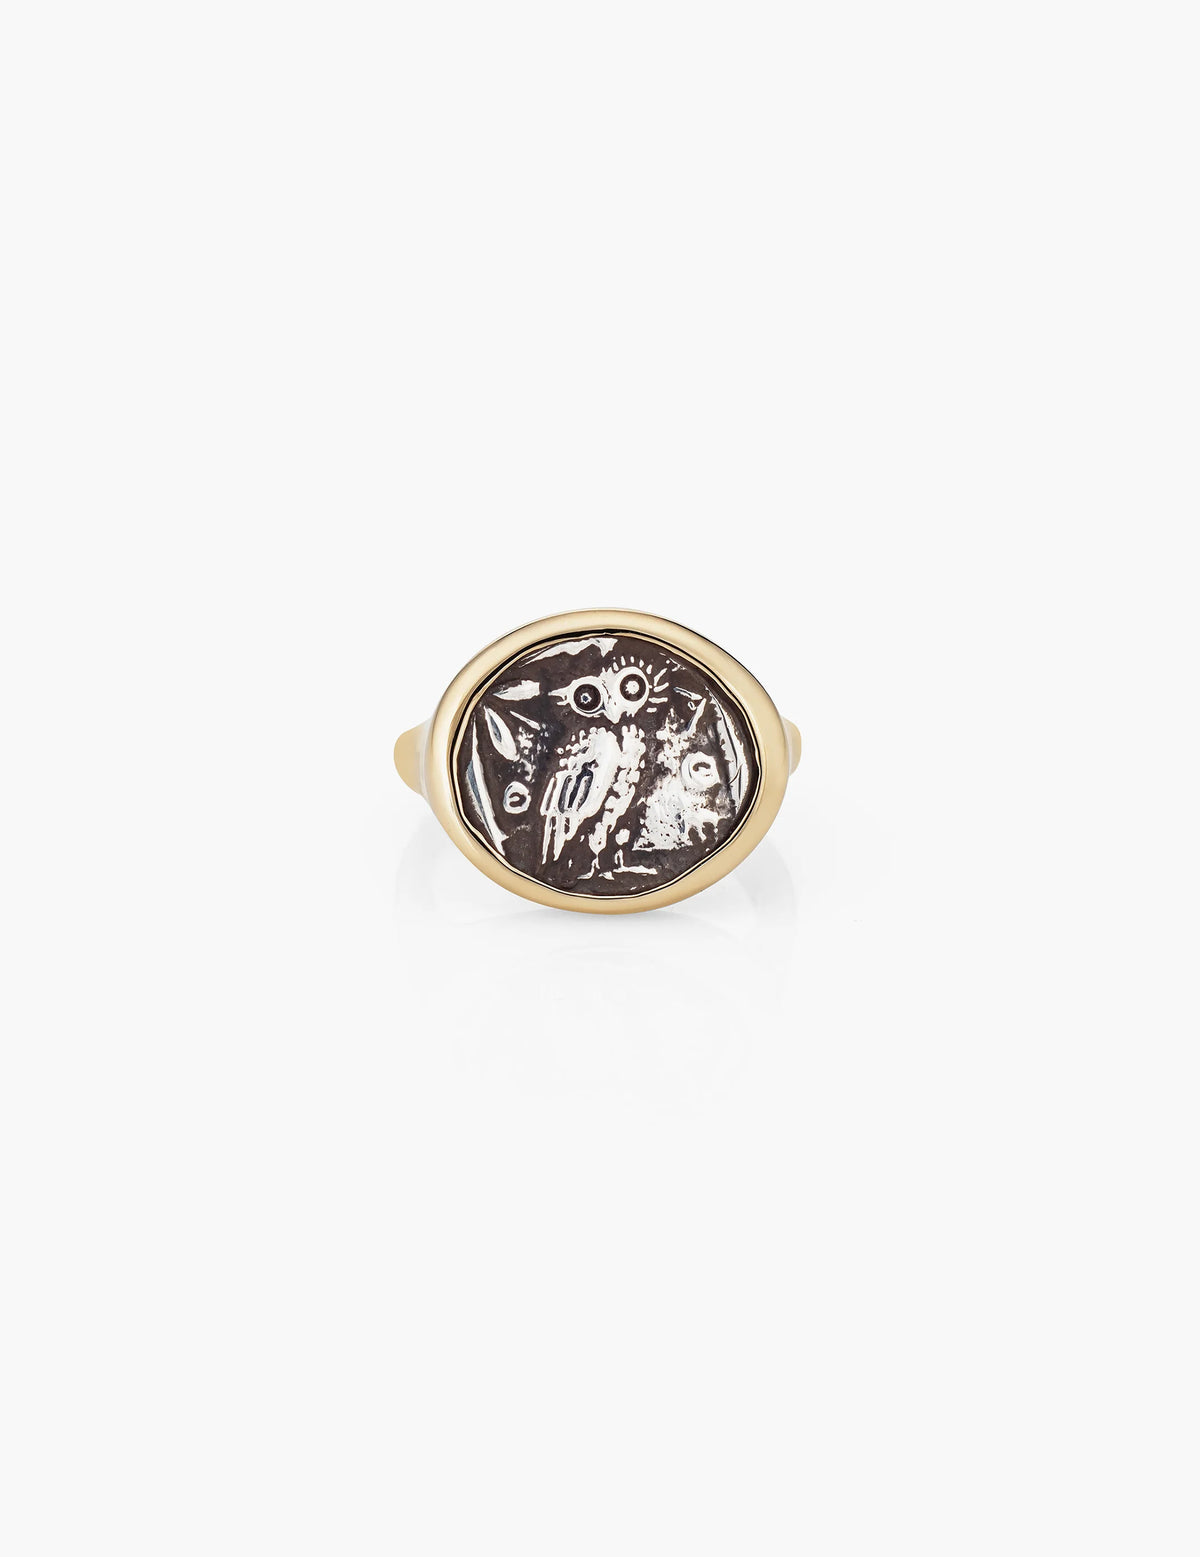 Owl of Athena Coin Ring in Gold and Sterling Silver